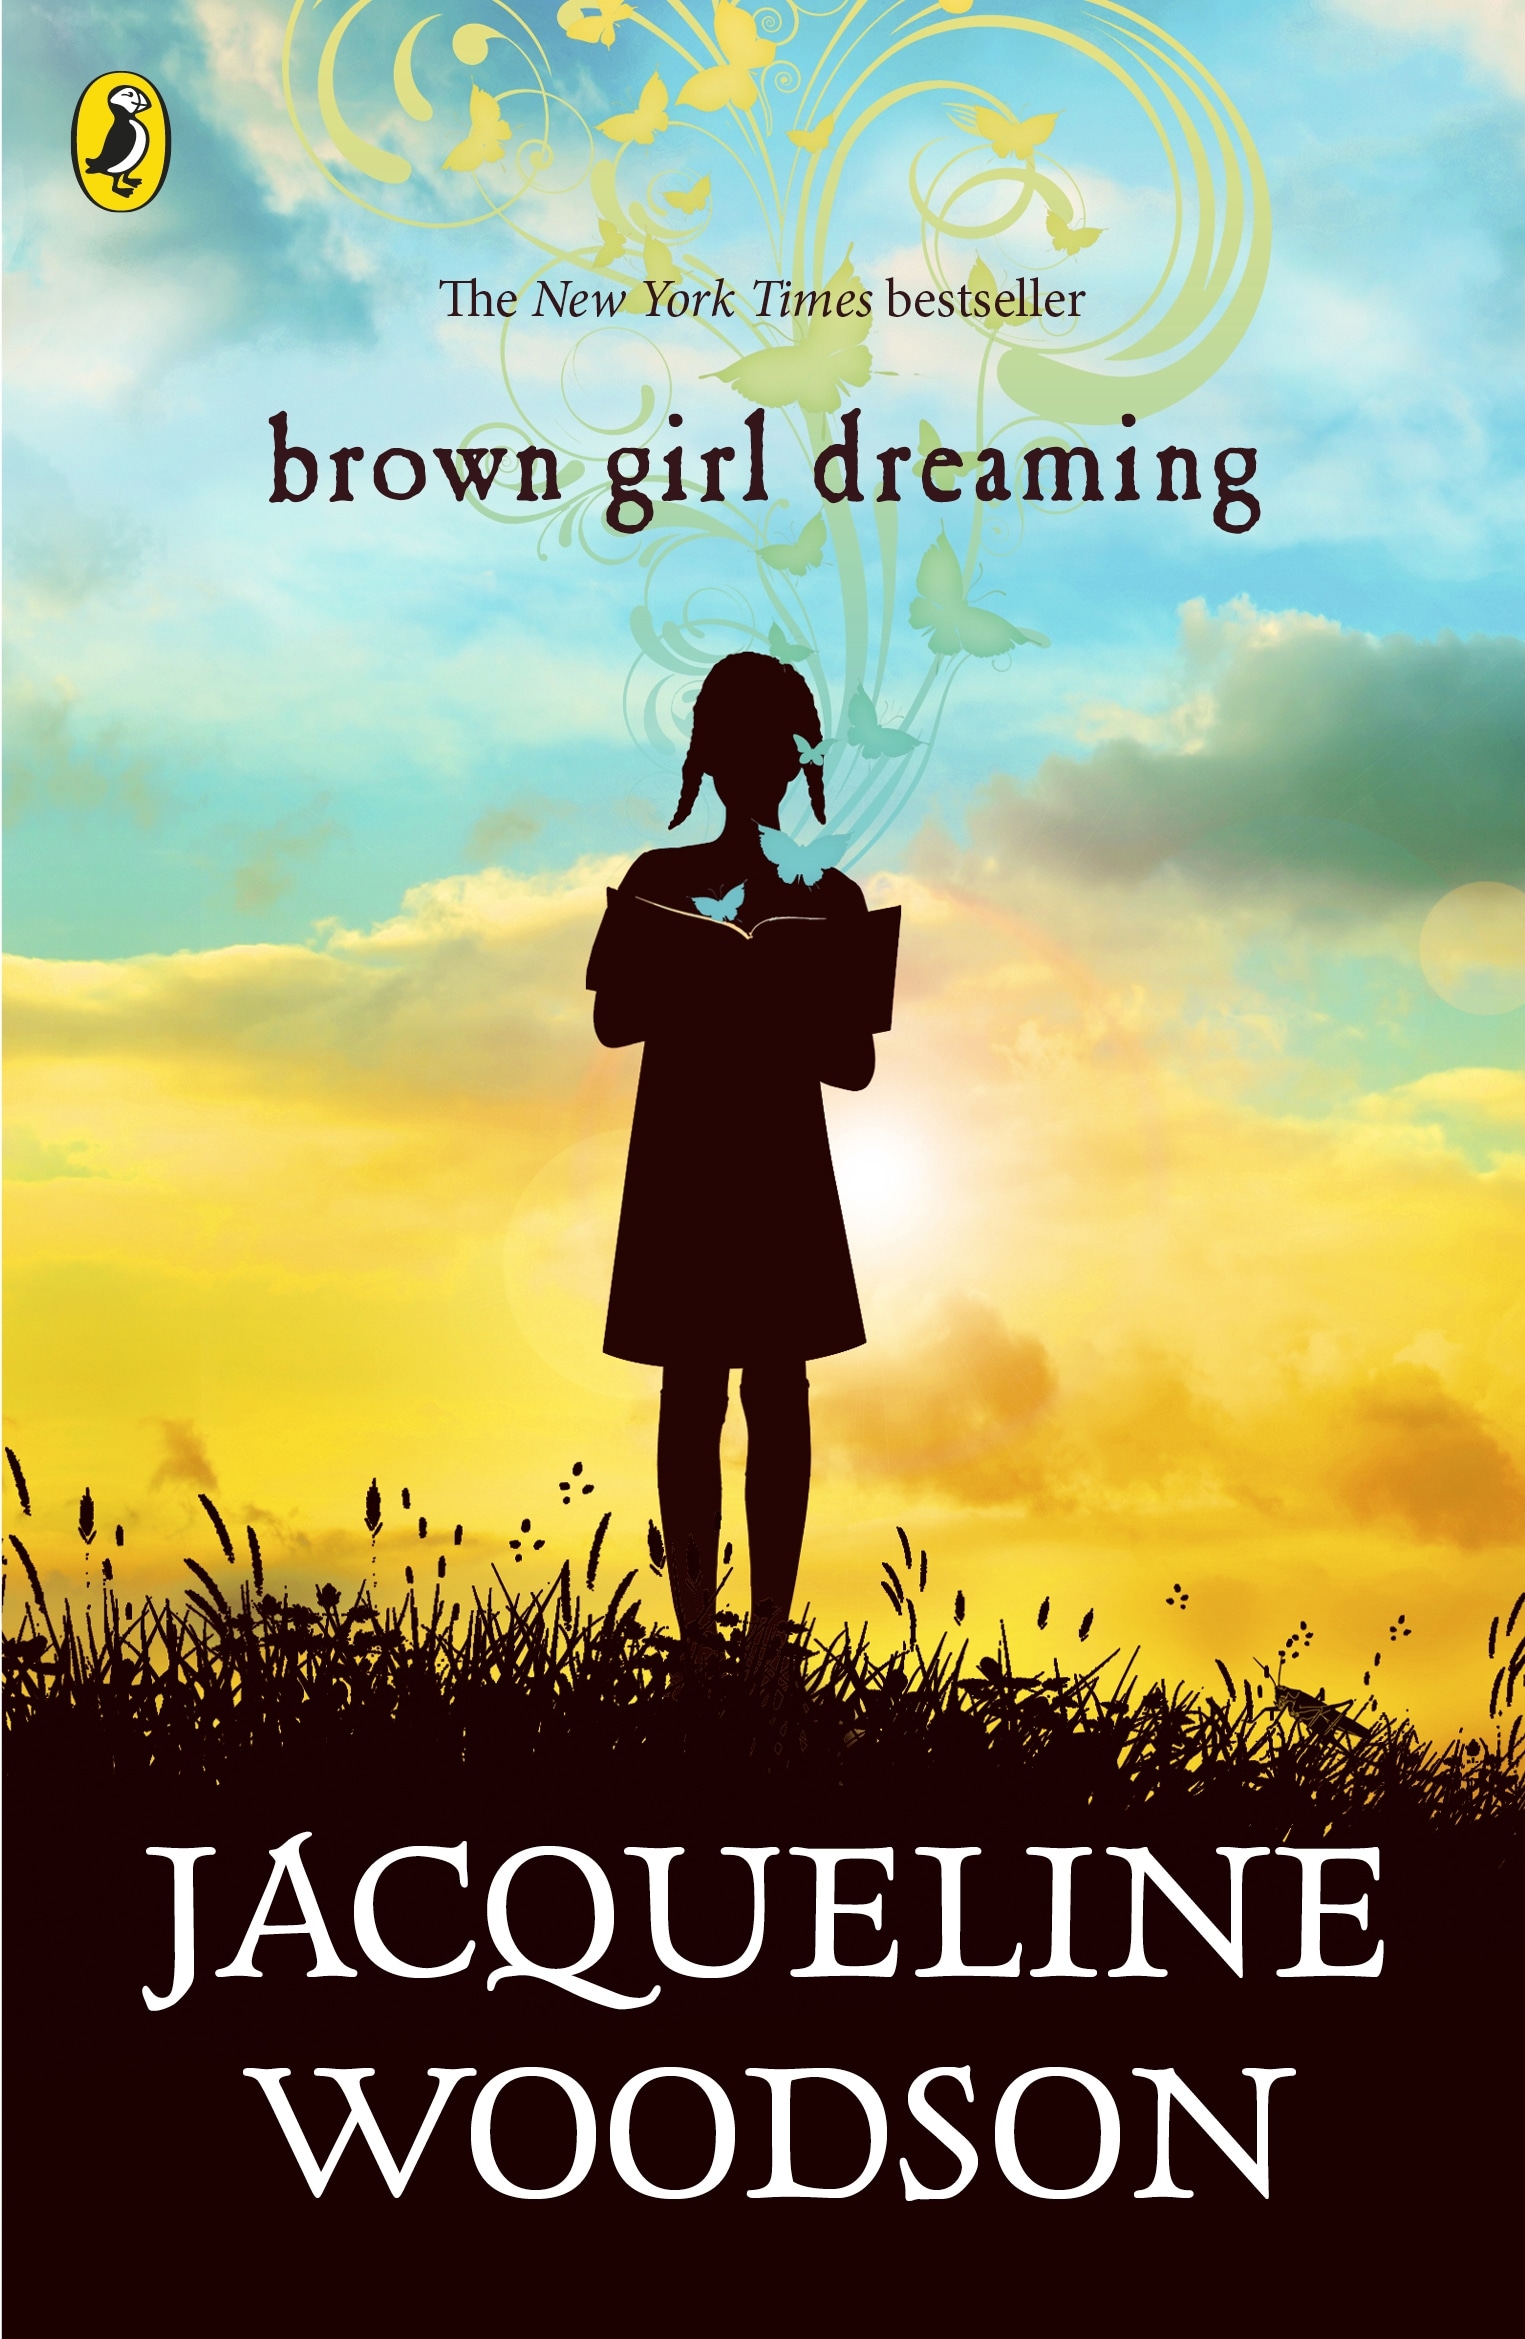 Book “Brown Girl Dreaming” by Jacqueline Woodson — April 2, 2020